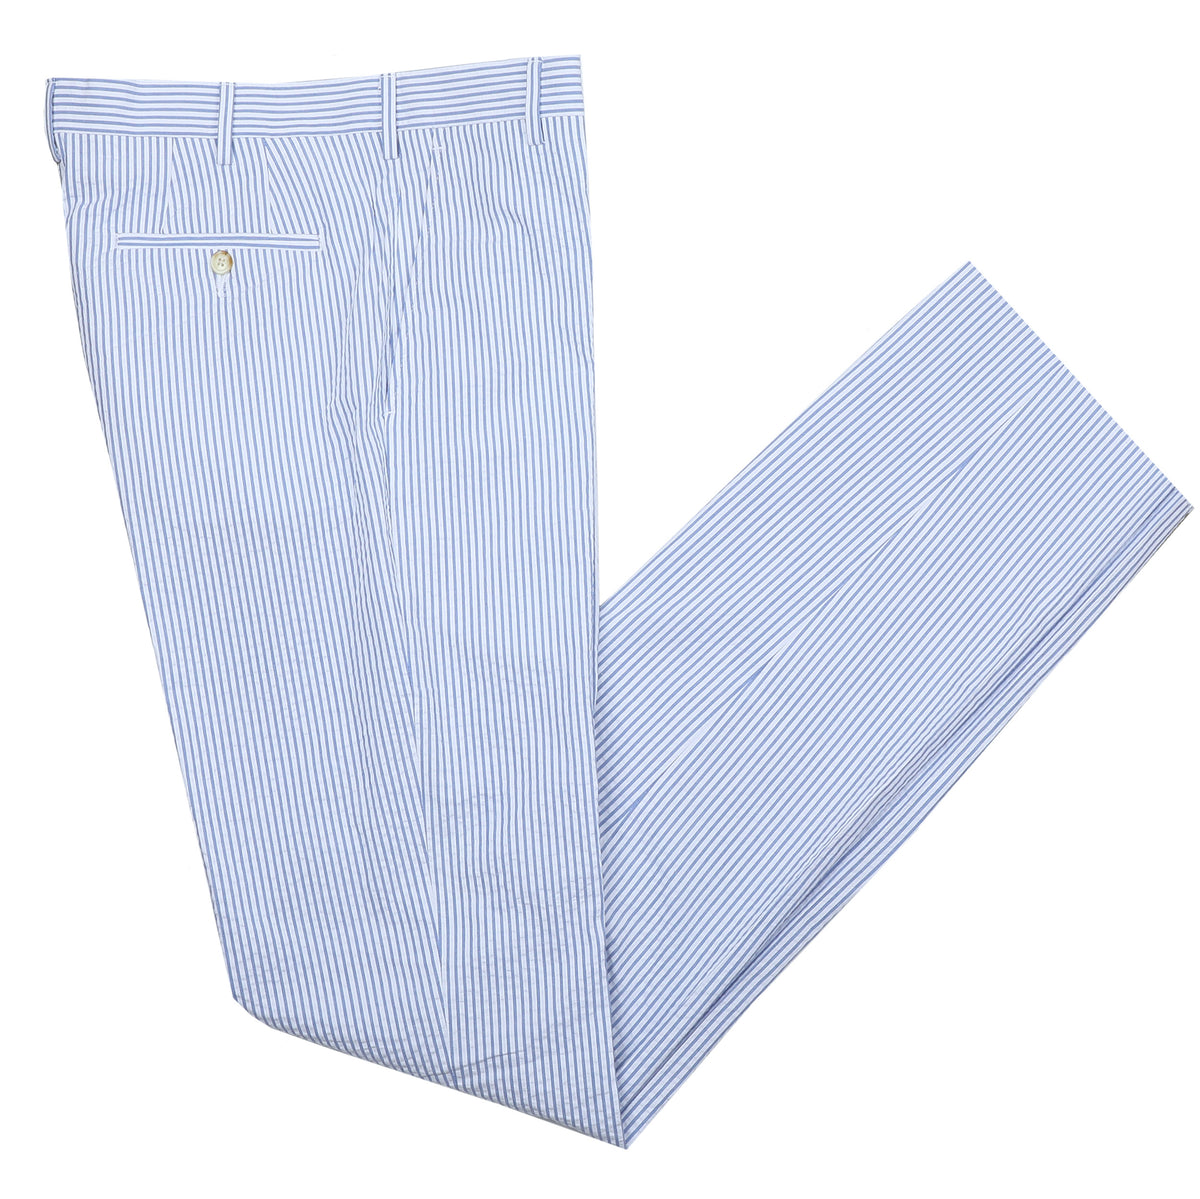 Experience the breezy, classic charm of our Algiers Lt. Blue / White Seersucker Pant. These stunning New Orleans-inspired trousers are perfect for your next summer outing. Cut from lightweight seersucker fabric, they combine timeless Tan and White stripes with a relaxed fit for unbeatable comfort and style. Try them this season for a look that radiates effortless elegance!  100% Cotton Seersucker • Algiers Fit • Flat Front • Tab Button Closure • Unfinished Bottom (37.5&quot;) • Dry Clean • Imported